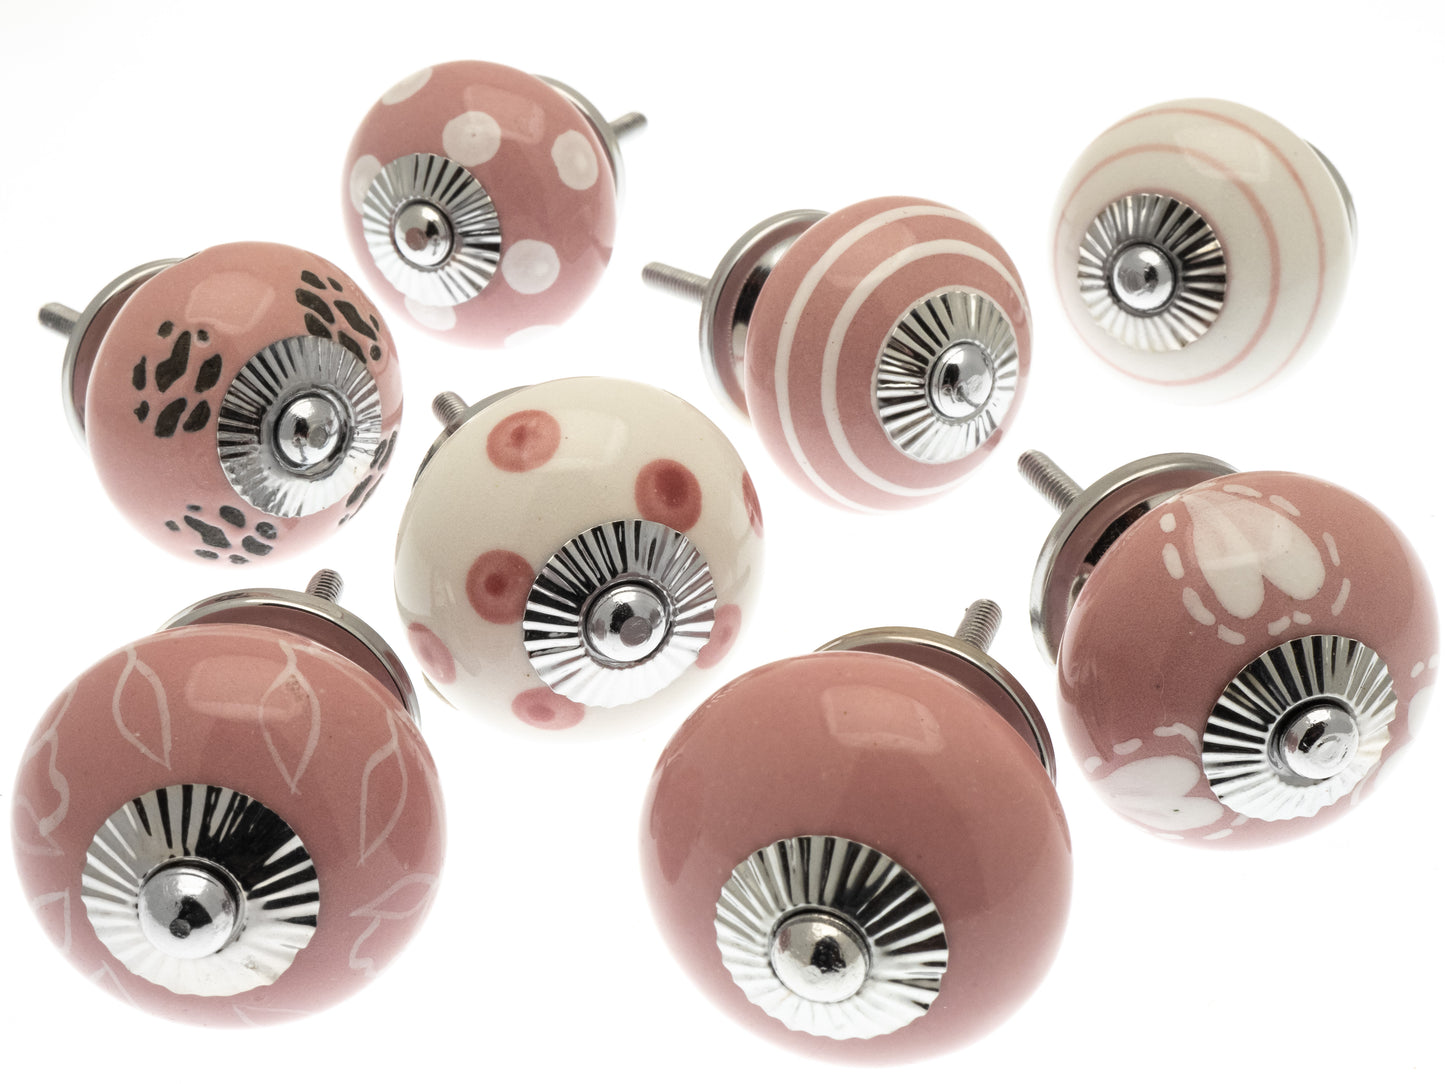 Ceramic Cupboard Knobs in Pink and White Designs with Silver Fittings